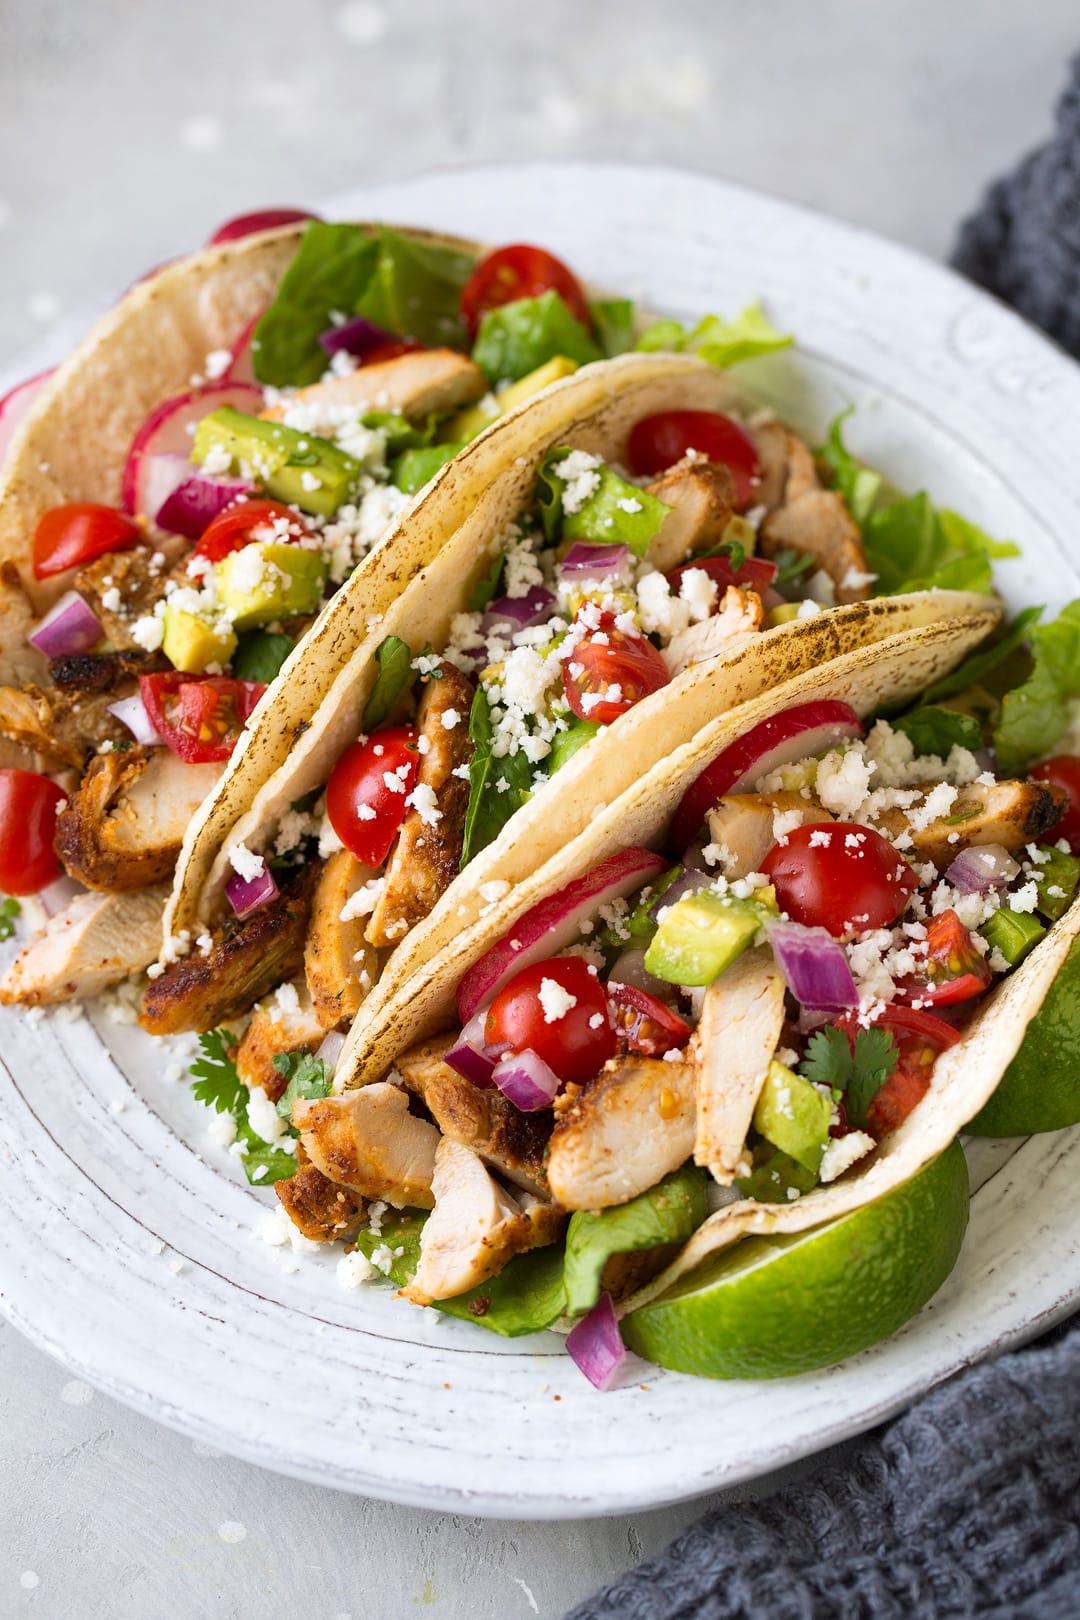 Oven Roasted Chicken Tacos